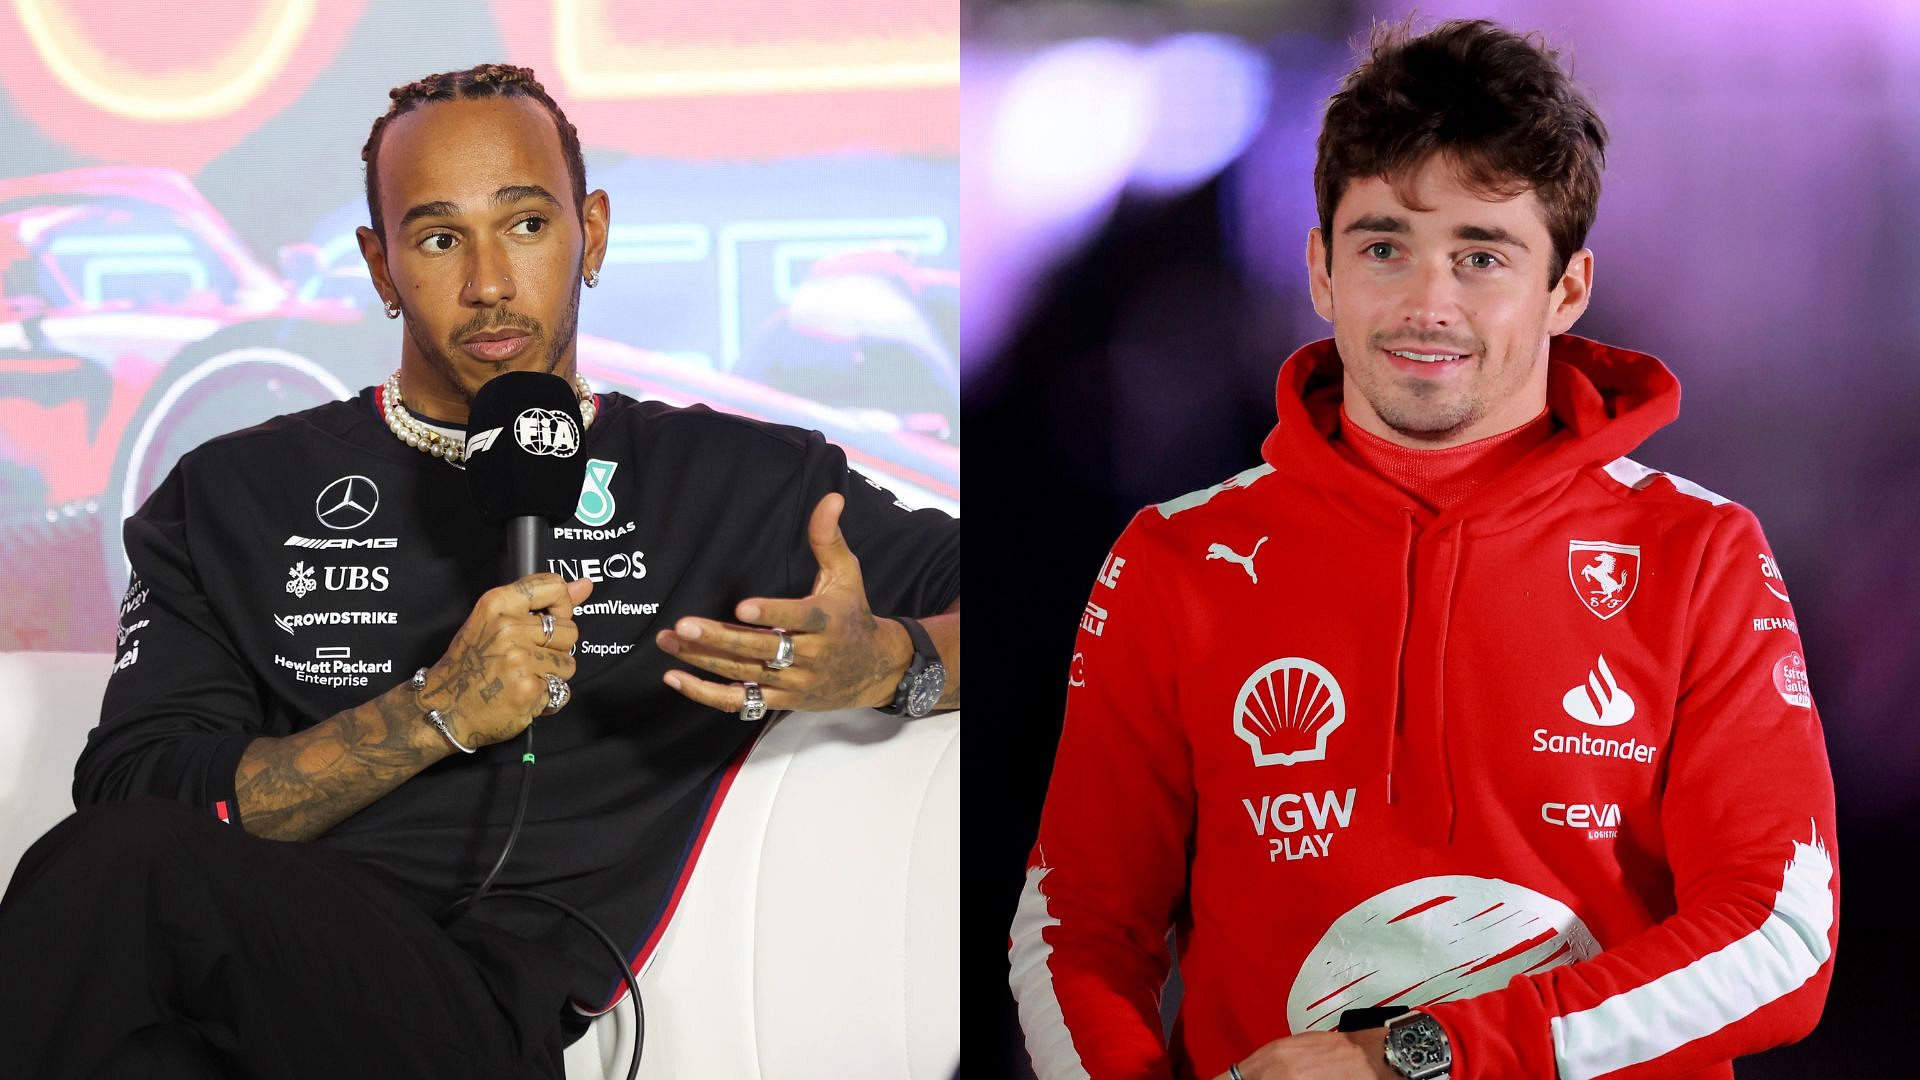 That's Why I'm Happy”: Charles Leclerc Rubs Salt in Mattia Binotto's Wounds  With Latest Fred Vasseur Update - The SportsRush